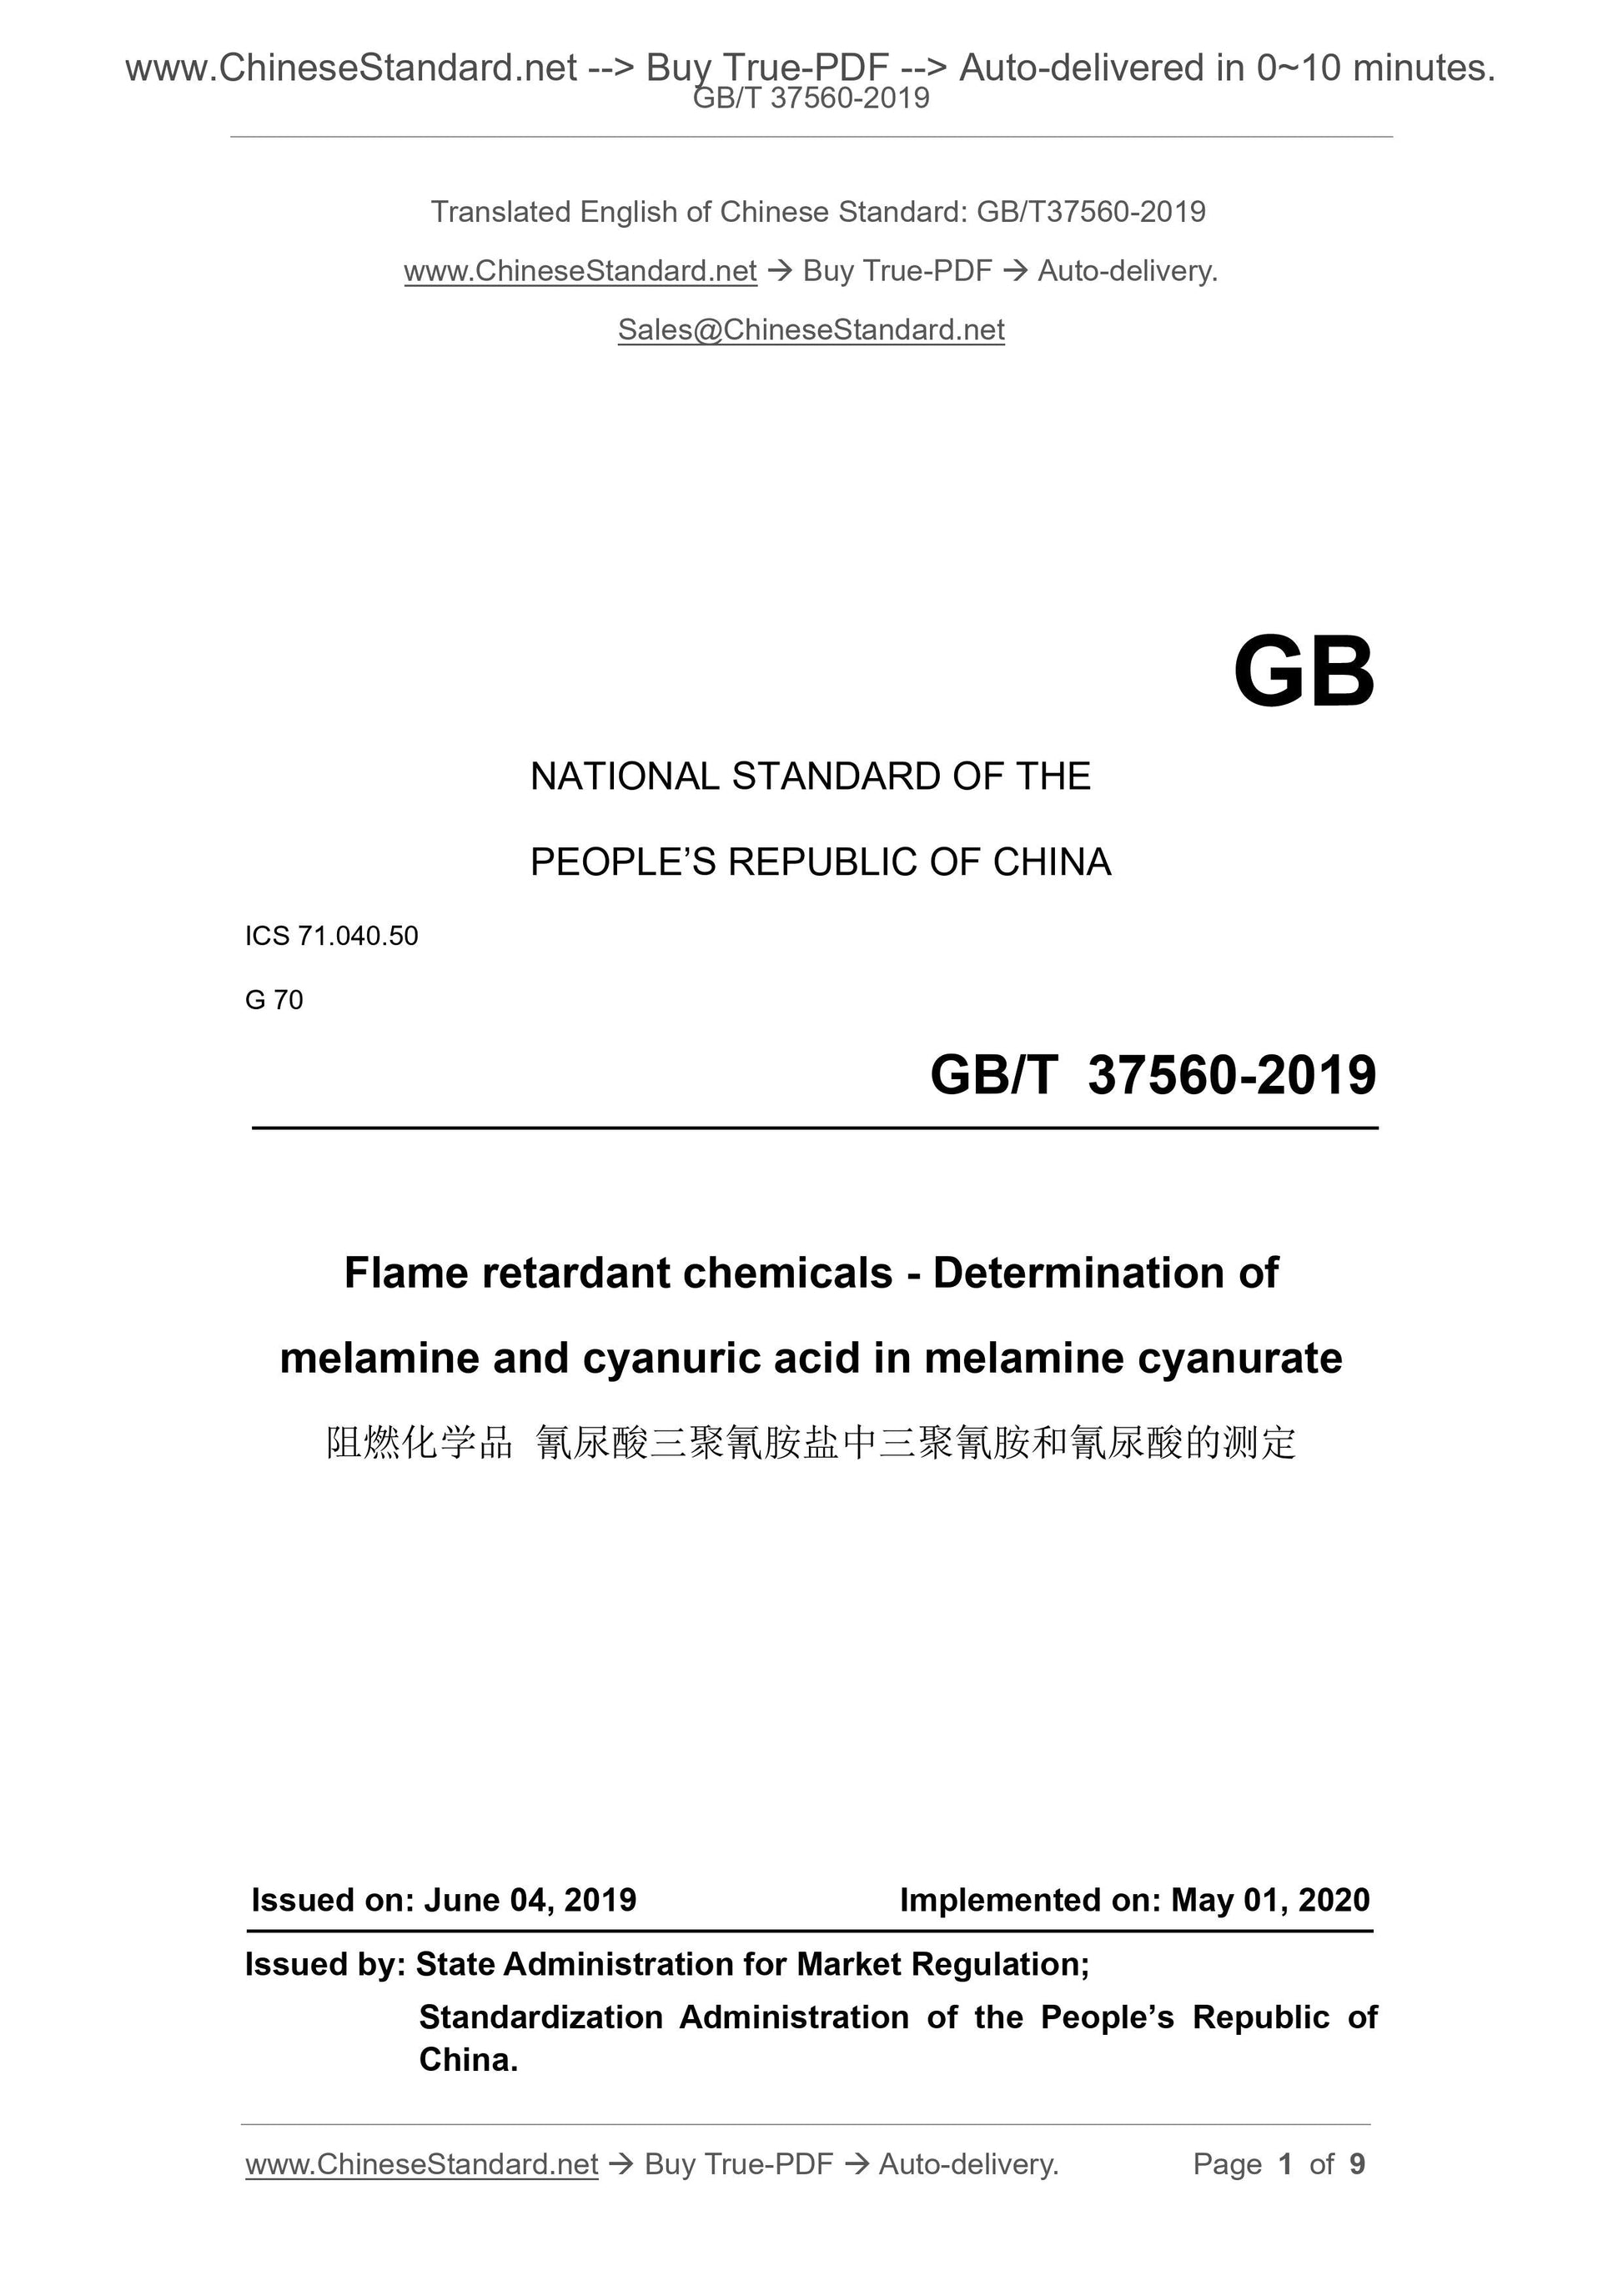 GB/T 37560-2019 Page 1